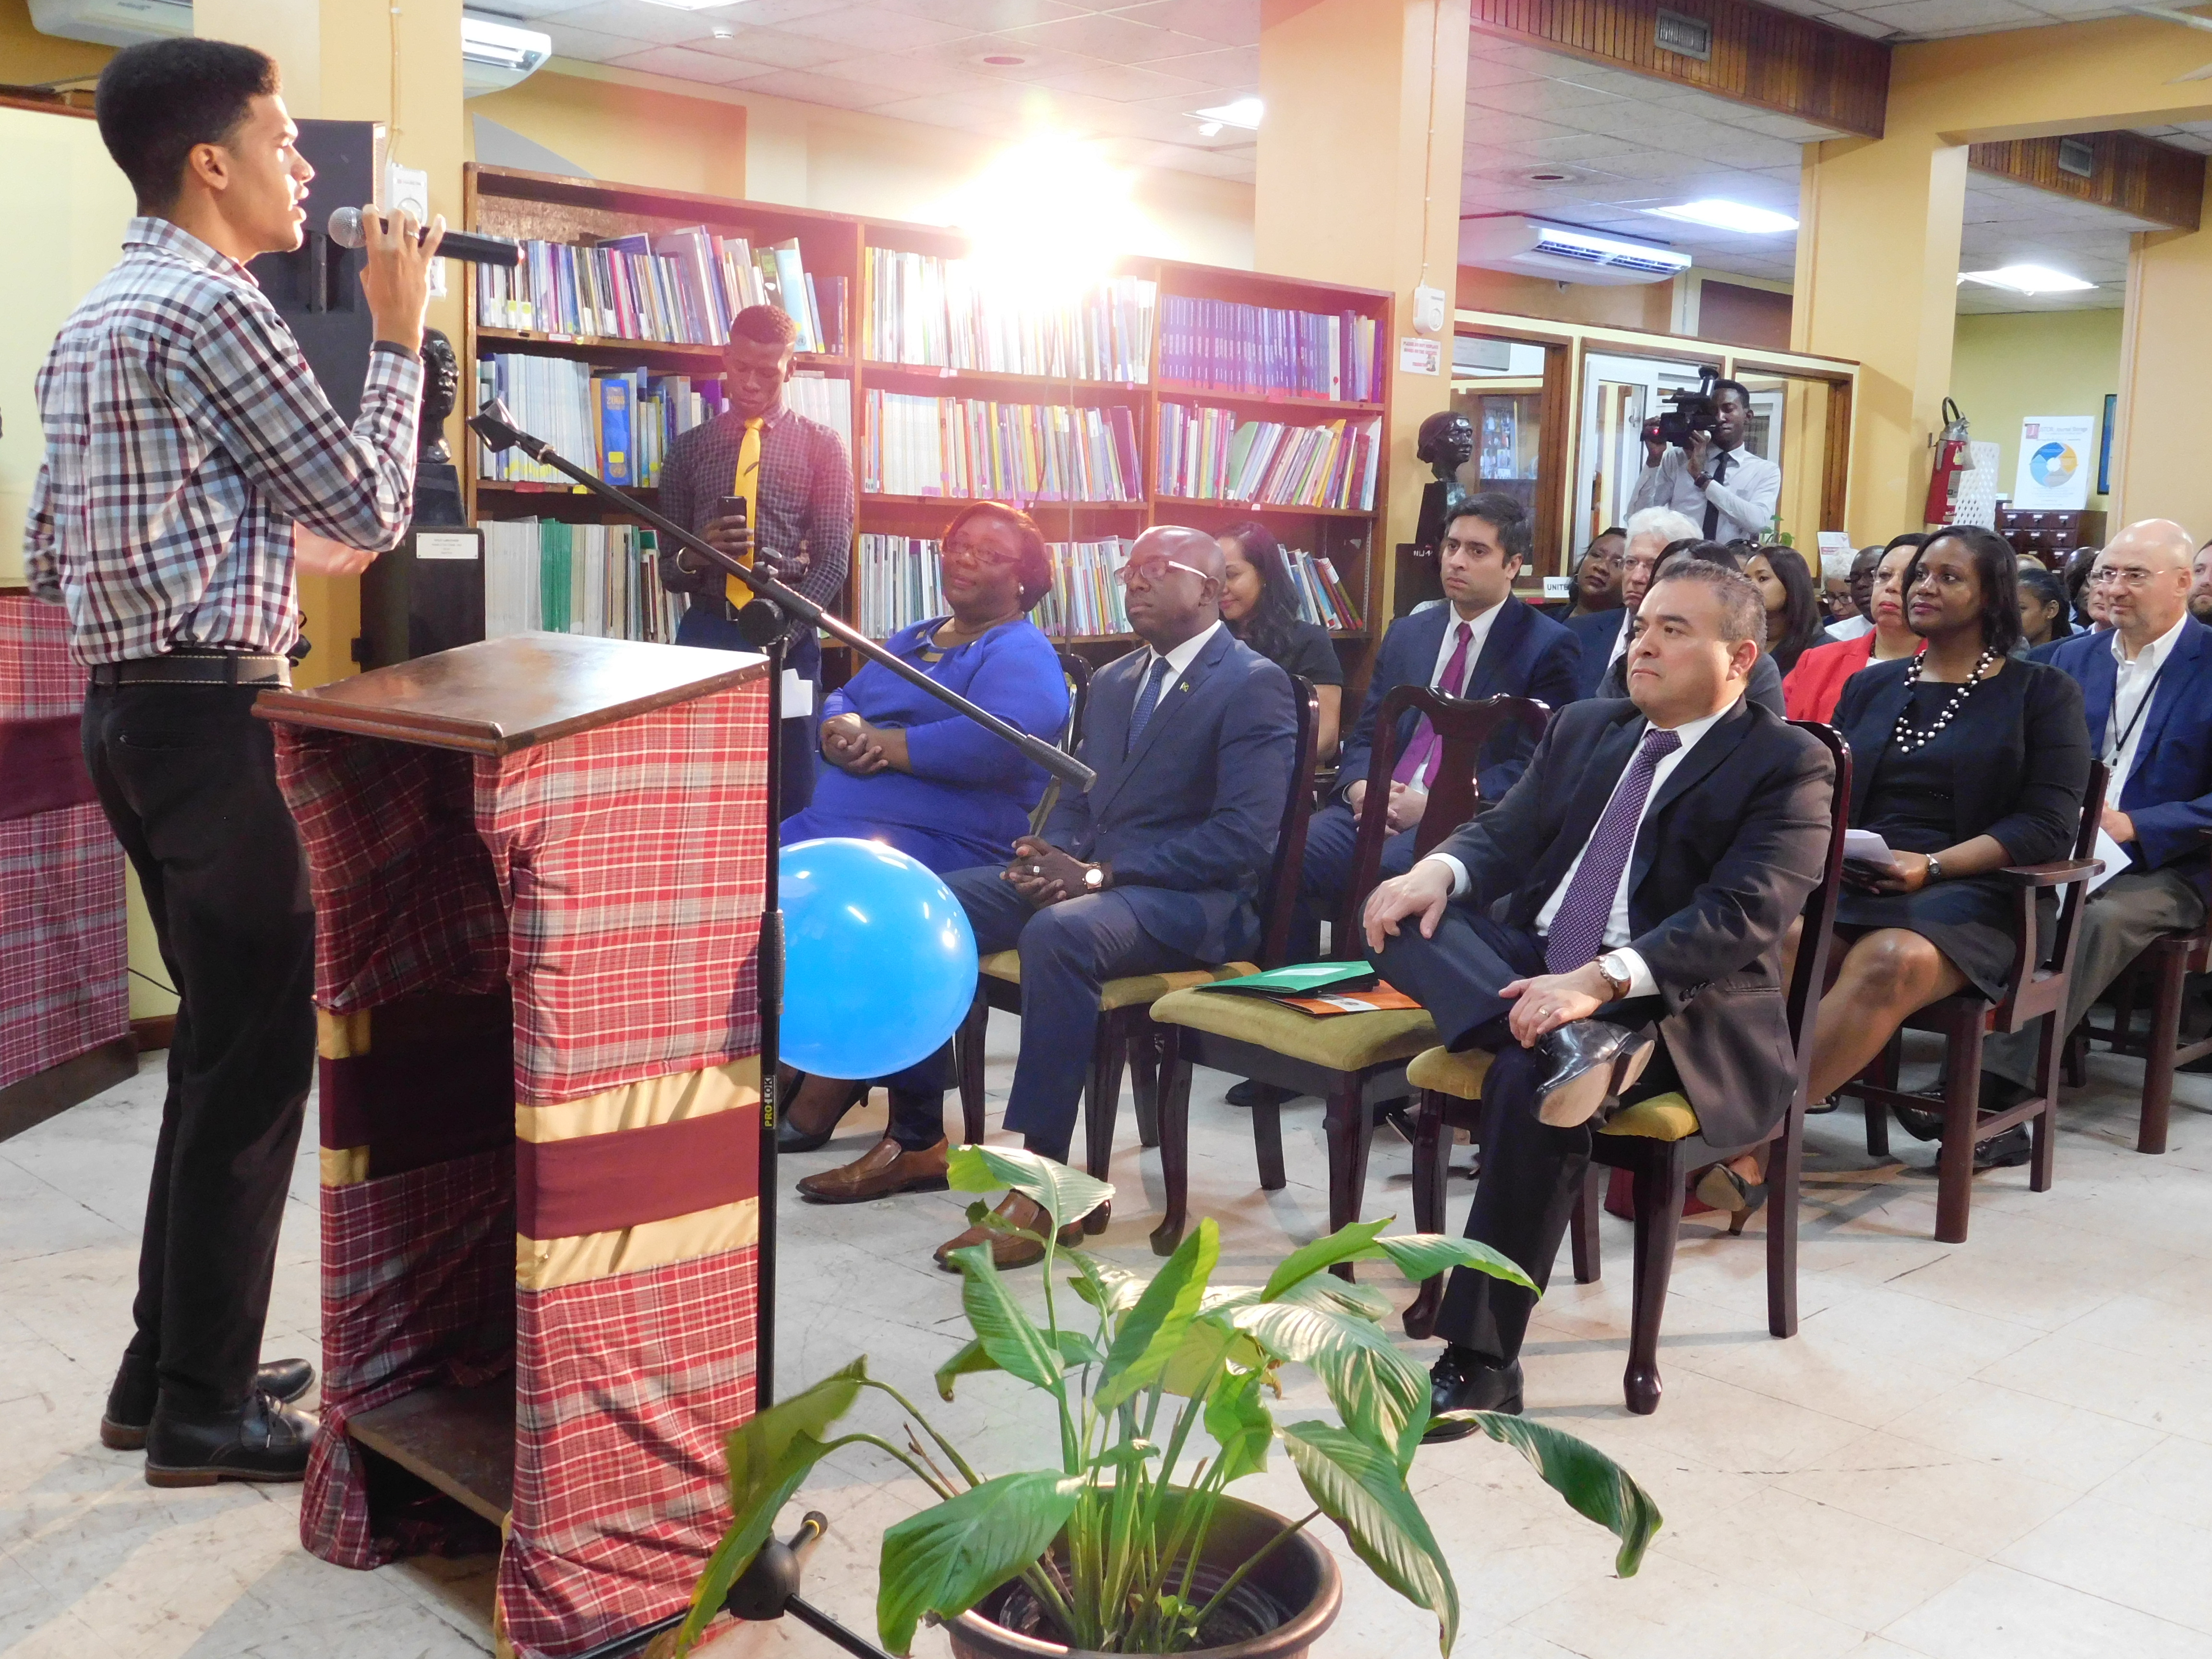 Launch of NLJ Travel Exhibition on the OAS(January 28, 2019)